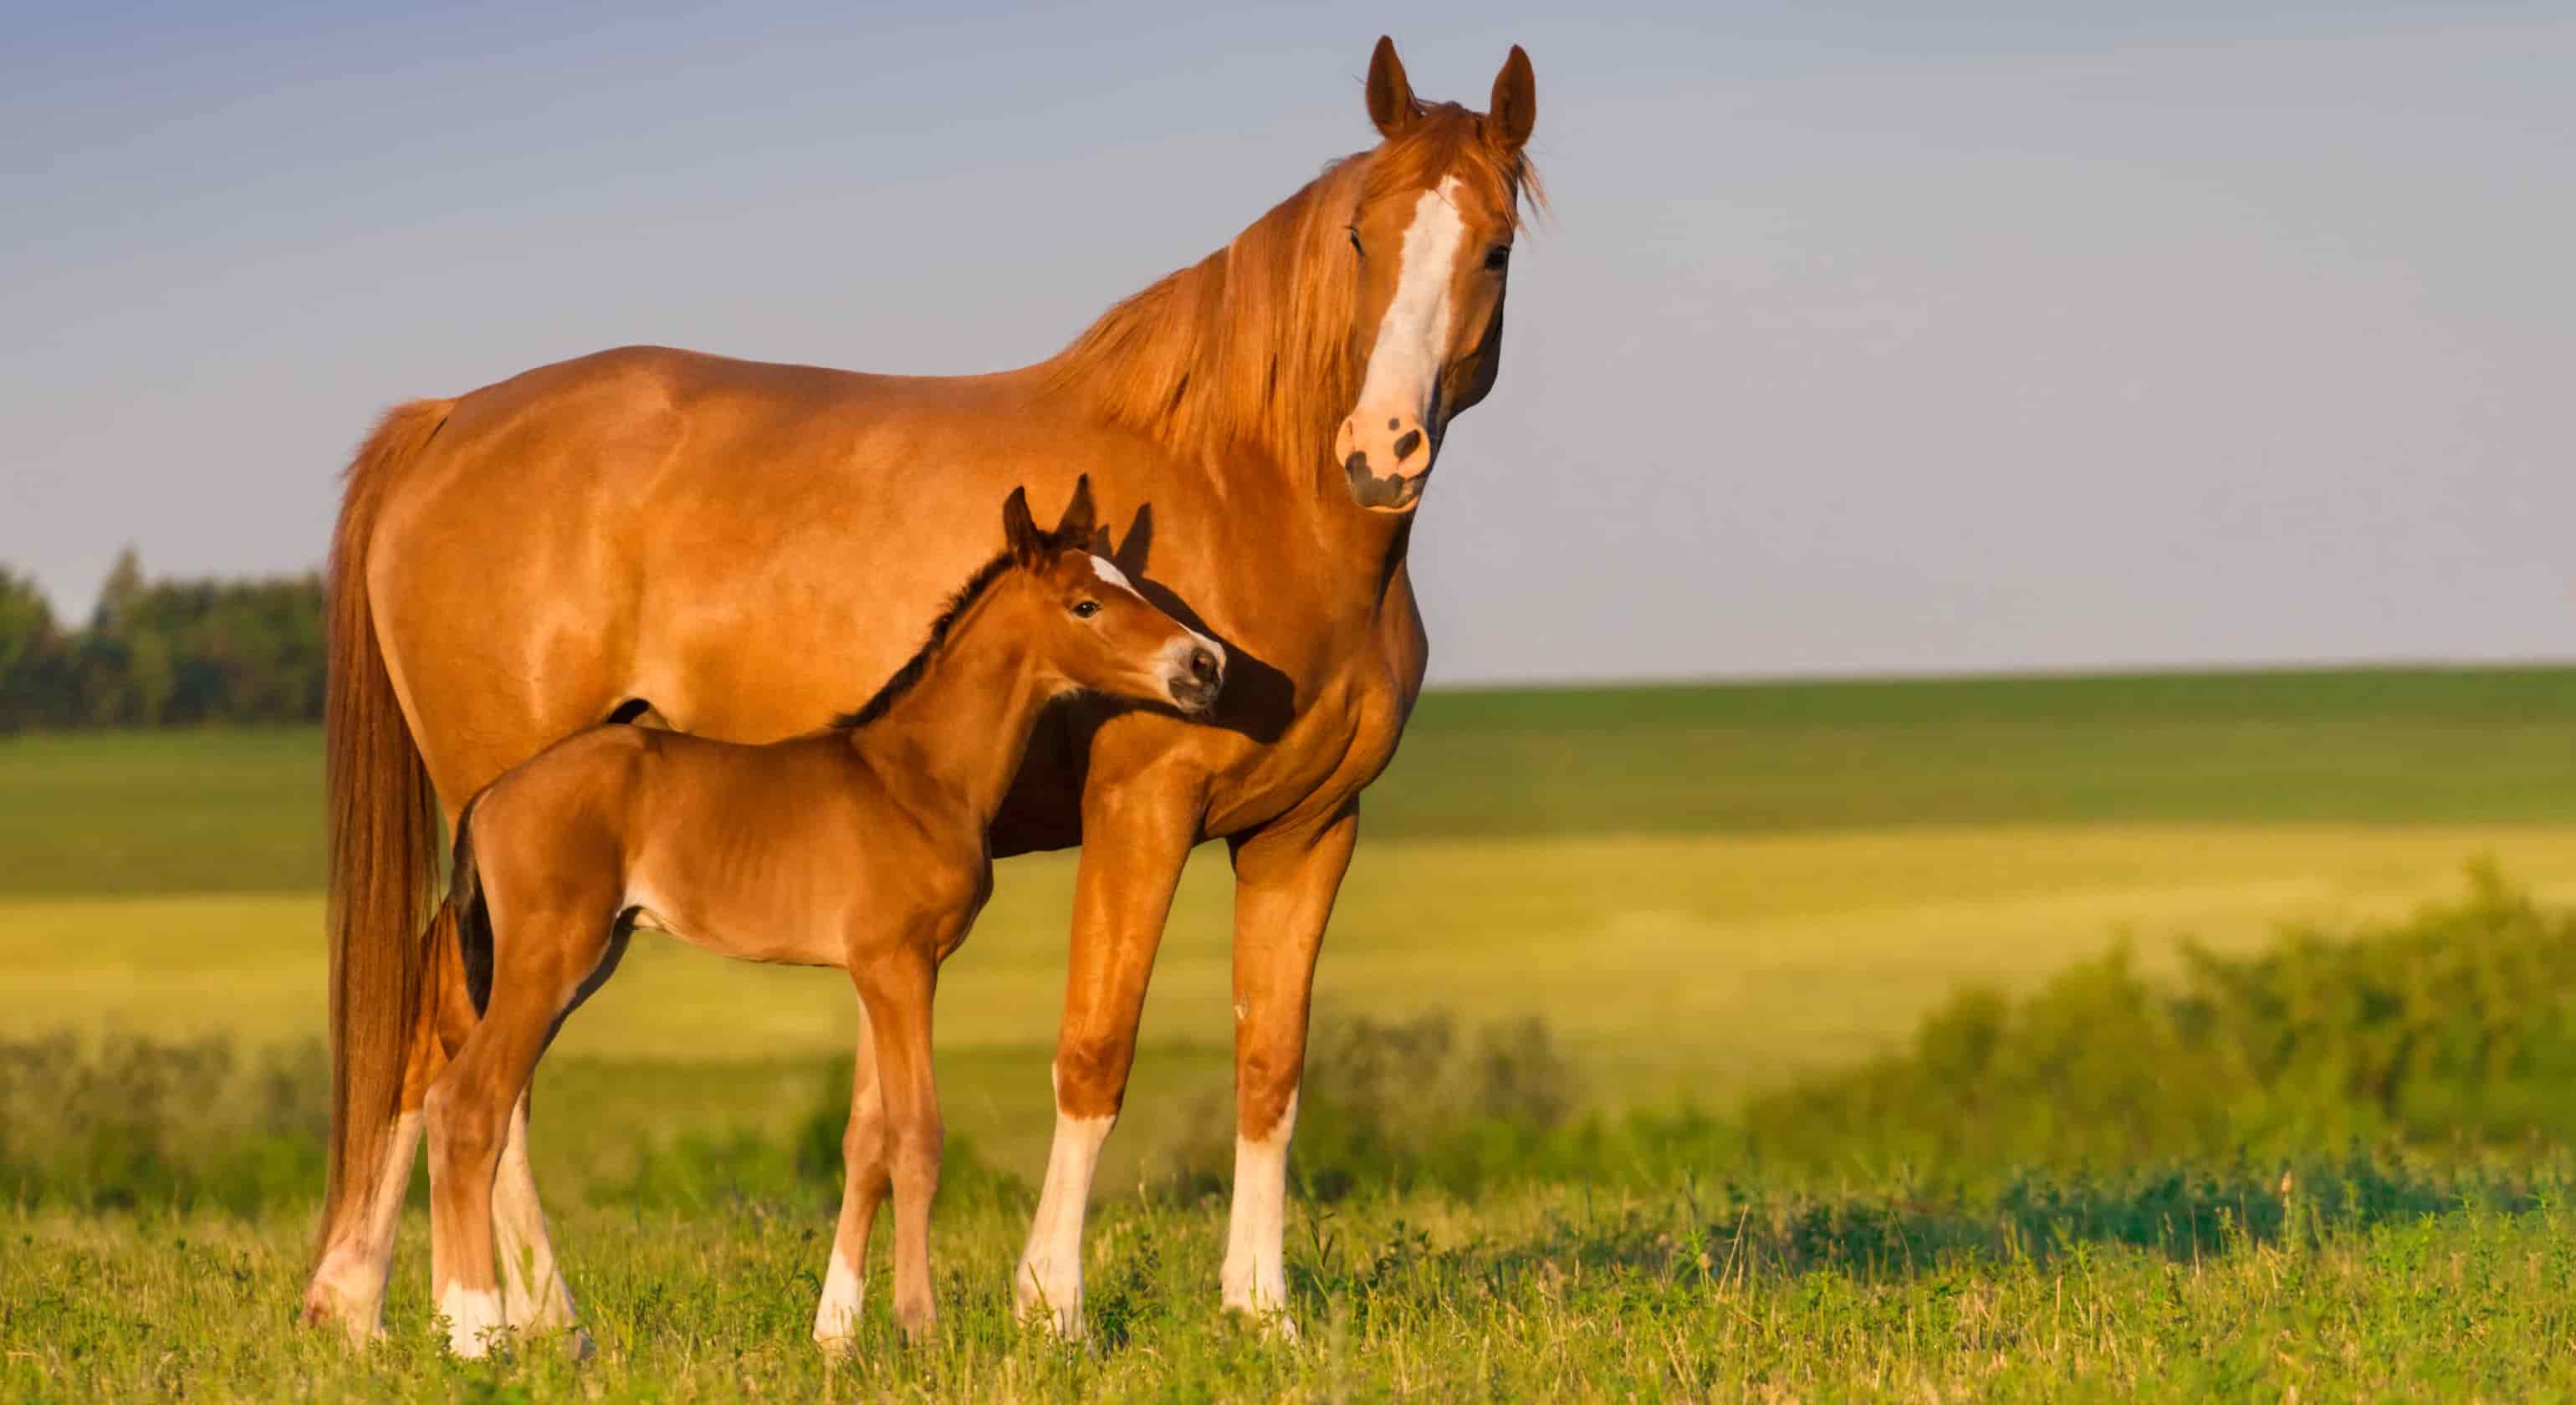 Weaning Season Nutrition for Foals and Mares